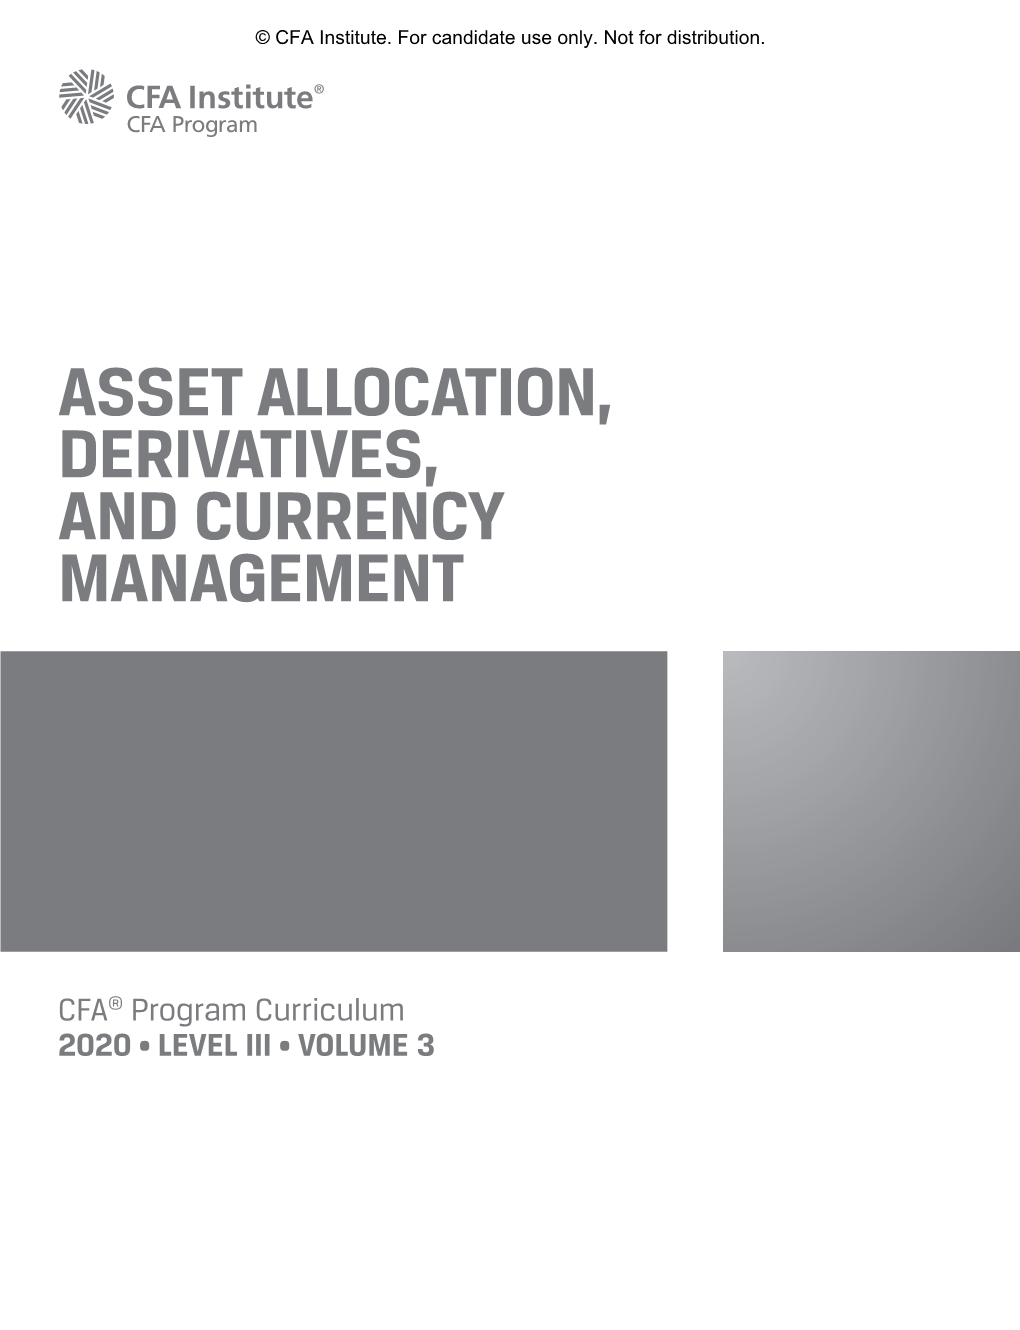 Asset Allocation, Derivatives, and Currency Management